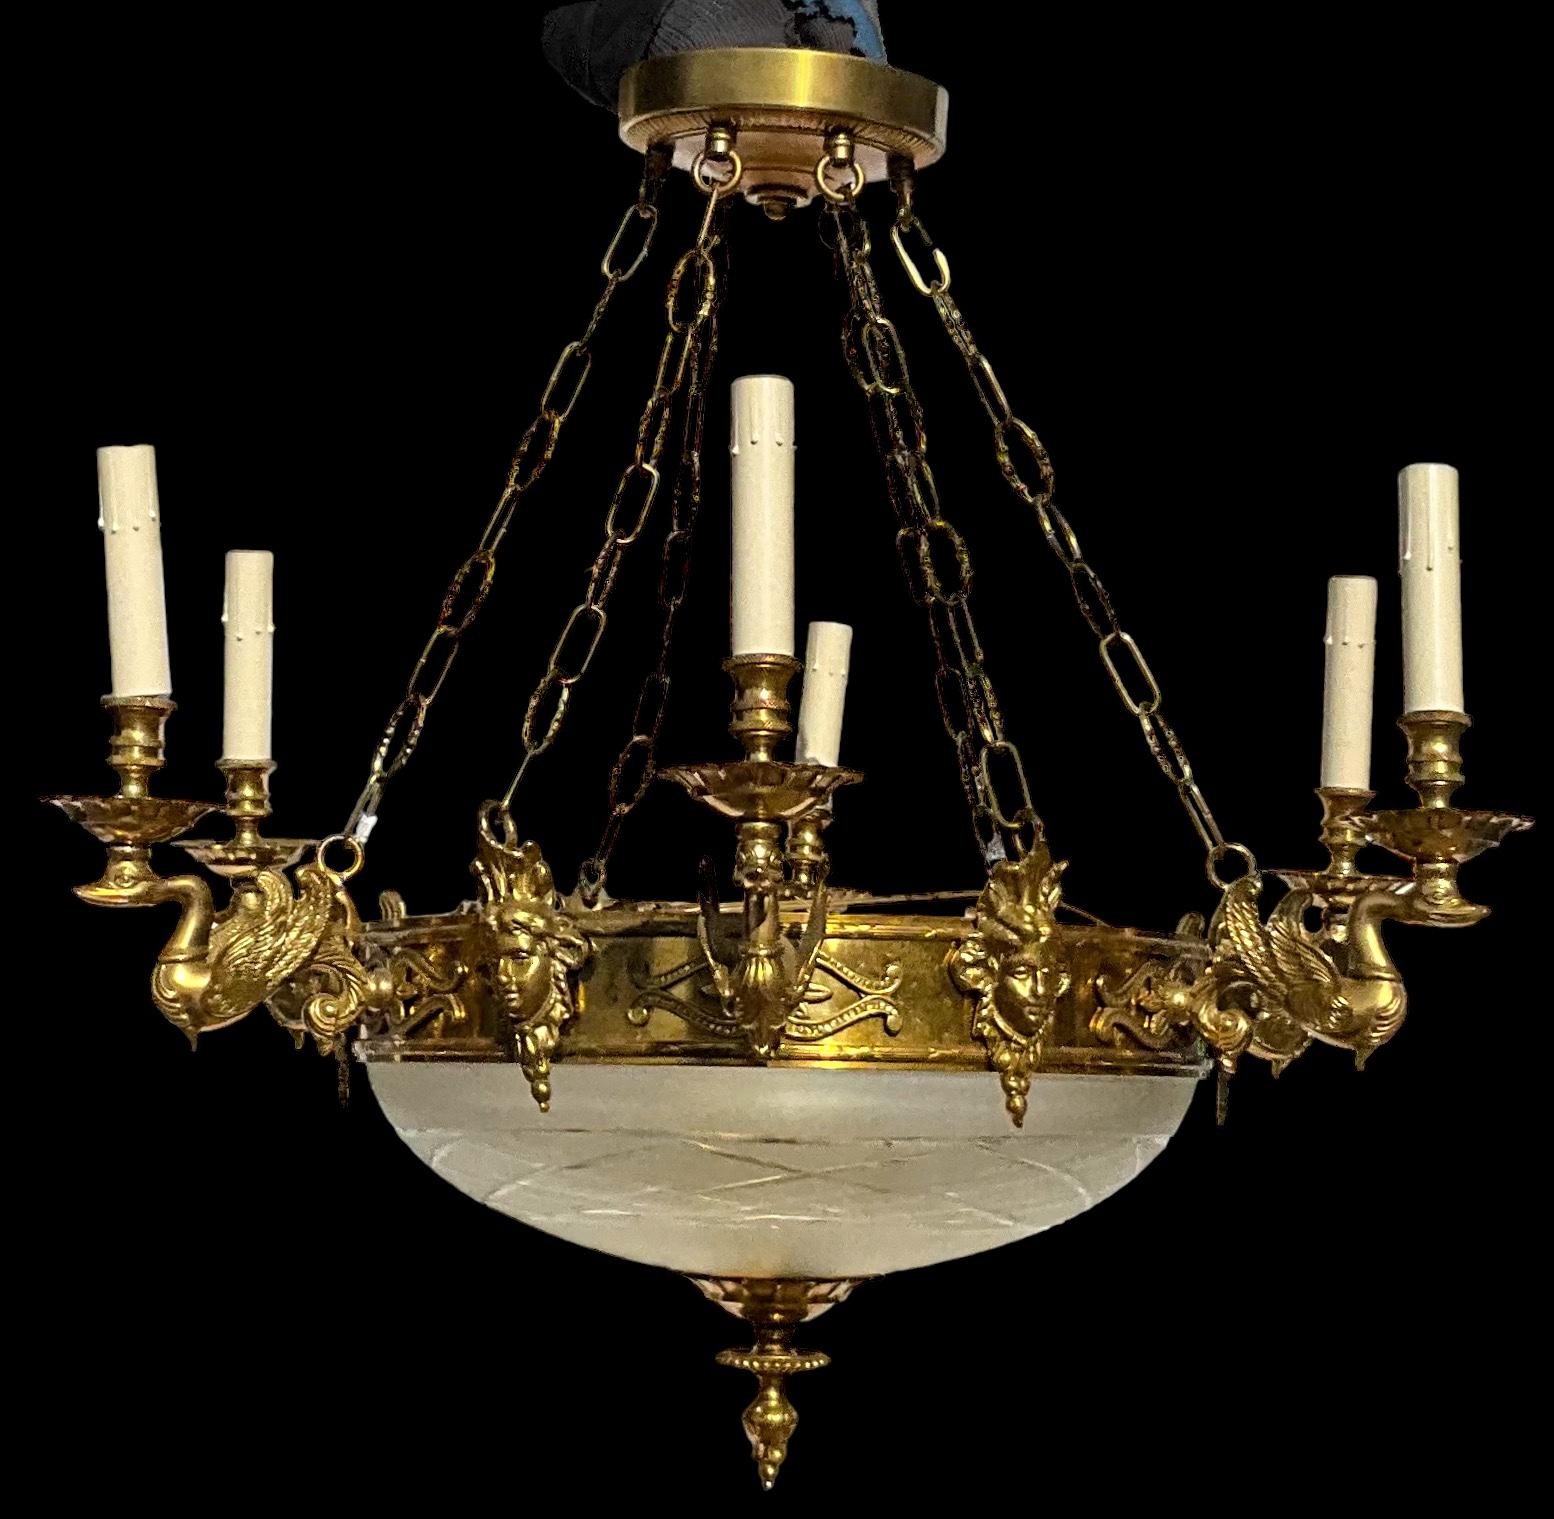 This is a French Empire style heavy brass chandelier. It is an Italian mid-century piece. The wiring has been completely re-done by a professional. There are six arms that are supported by swans. The bottom is a large etched glass globe. The cap is